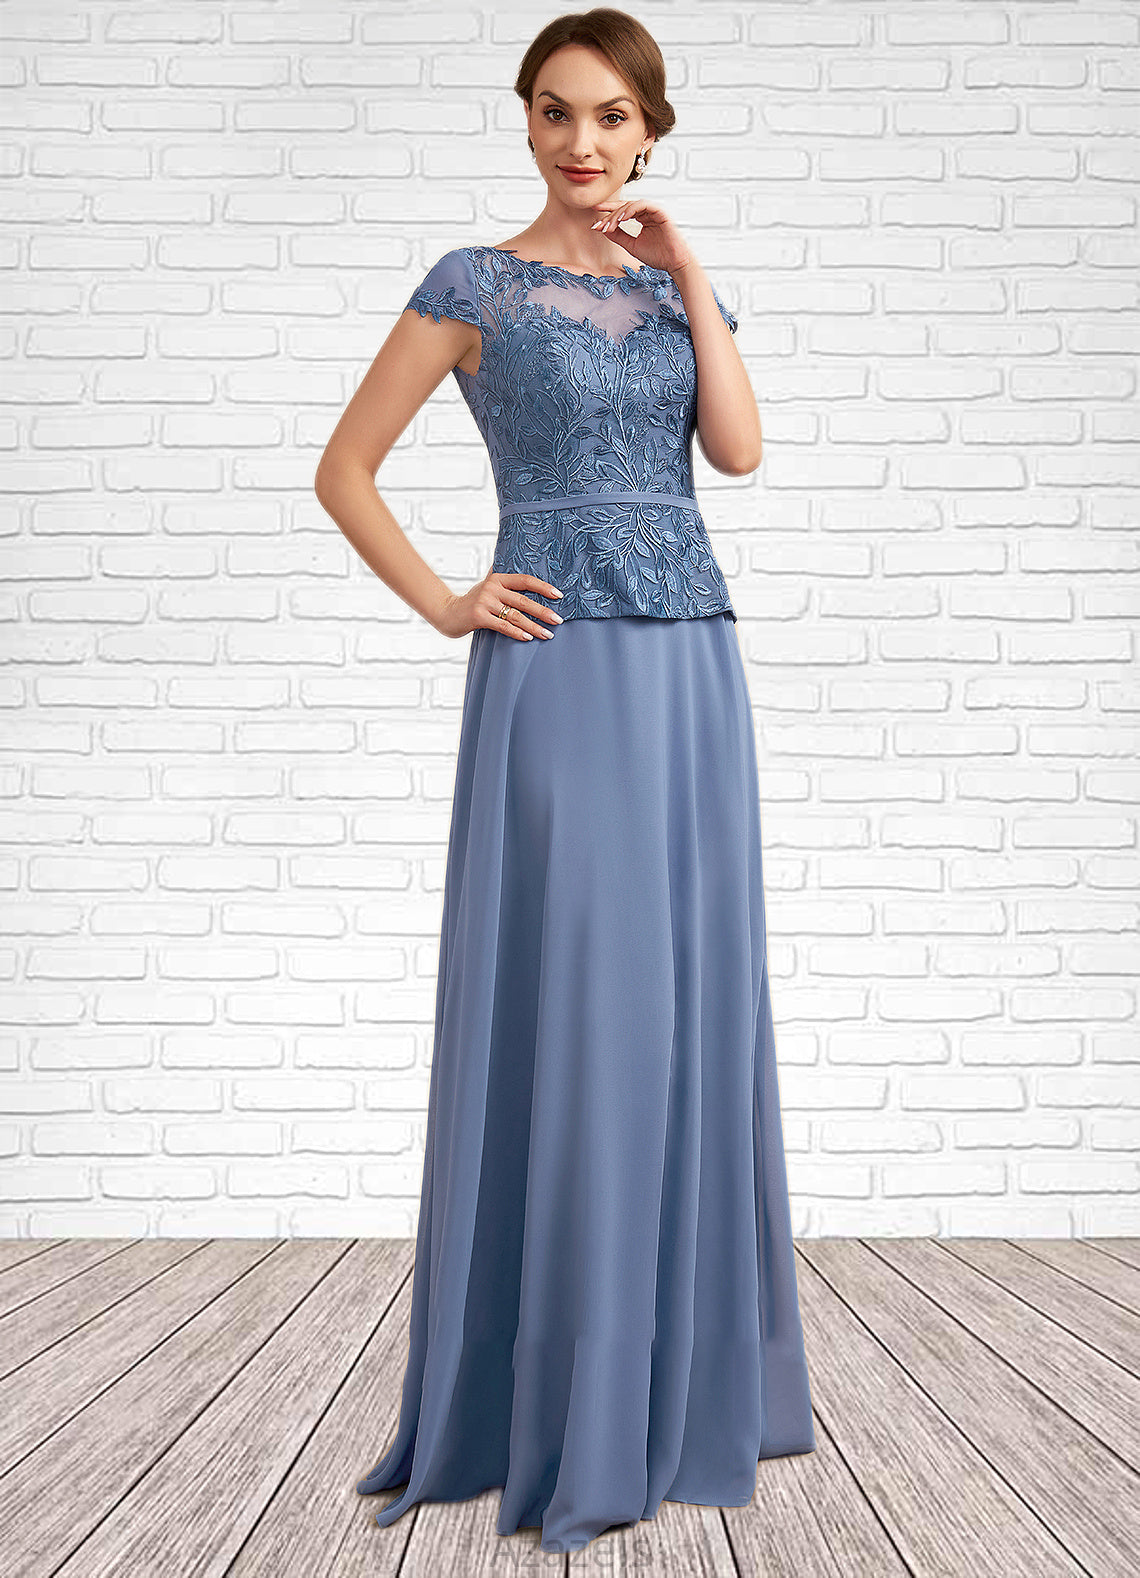 Nyasia A-Line Scoop Neck Floor-Length Chiffon Lace Mother of the Bride Dress DF126P0014989